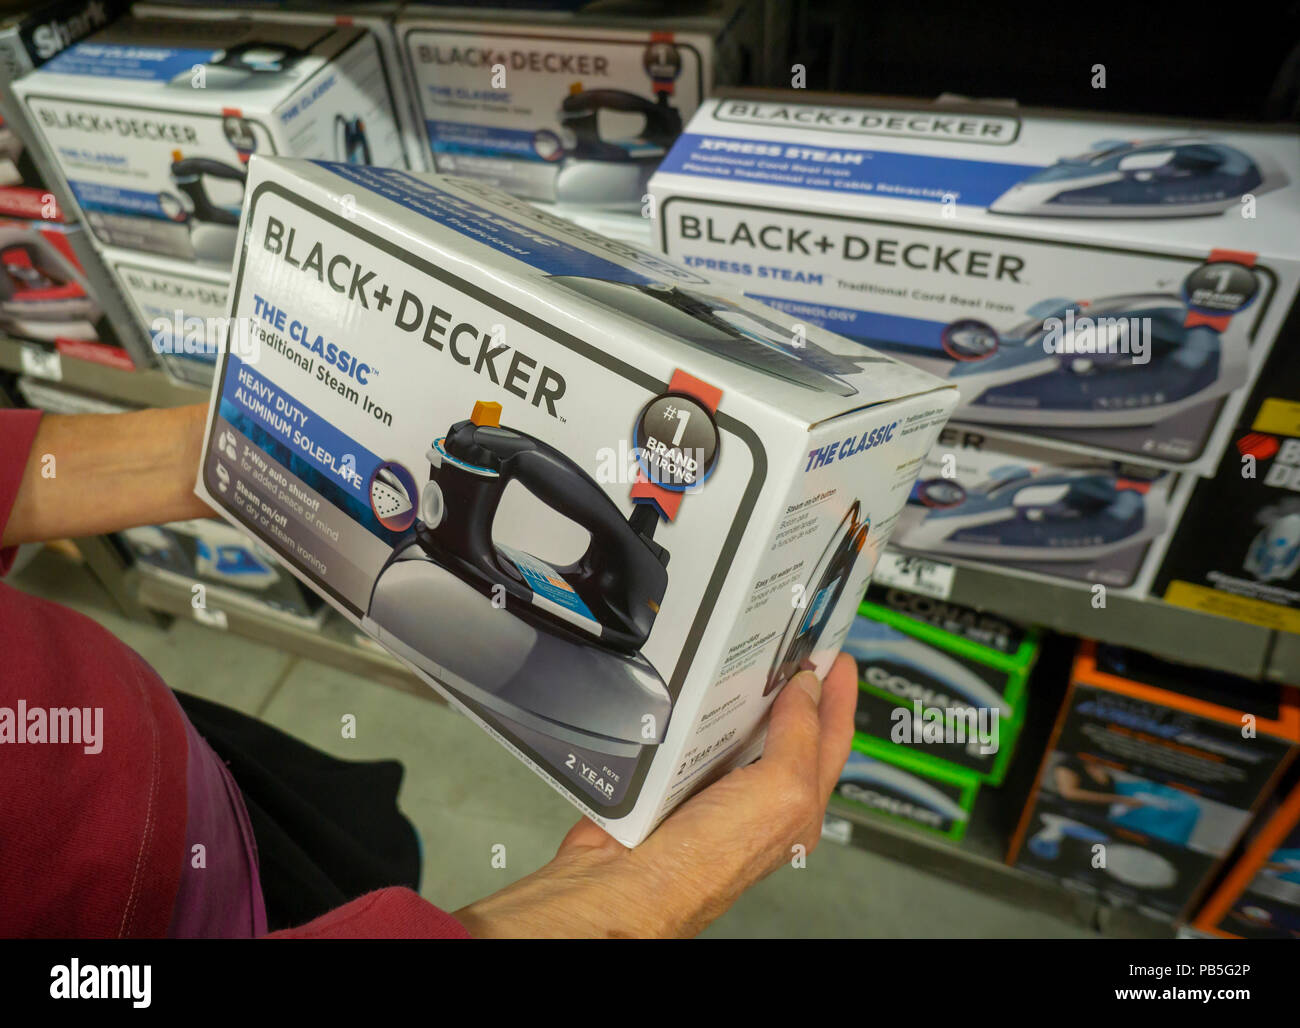 https://c8.alamy.com/comp/PB5G2P/a-shopper-chooses-a-black-decker-brand-steam-iron-in-a-hardware-store-in-new-york-on-thursday-july-19-2018-stanley-black-decker-is-scheduled-to-report-second-quarter-earnings-on-july-20-prior-to-the-bell-richard-b-levine-PB5G2P.jpg